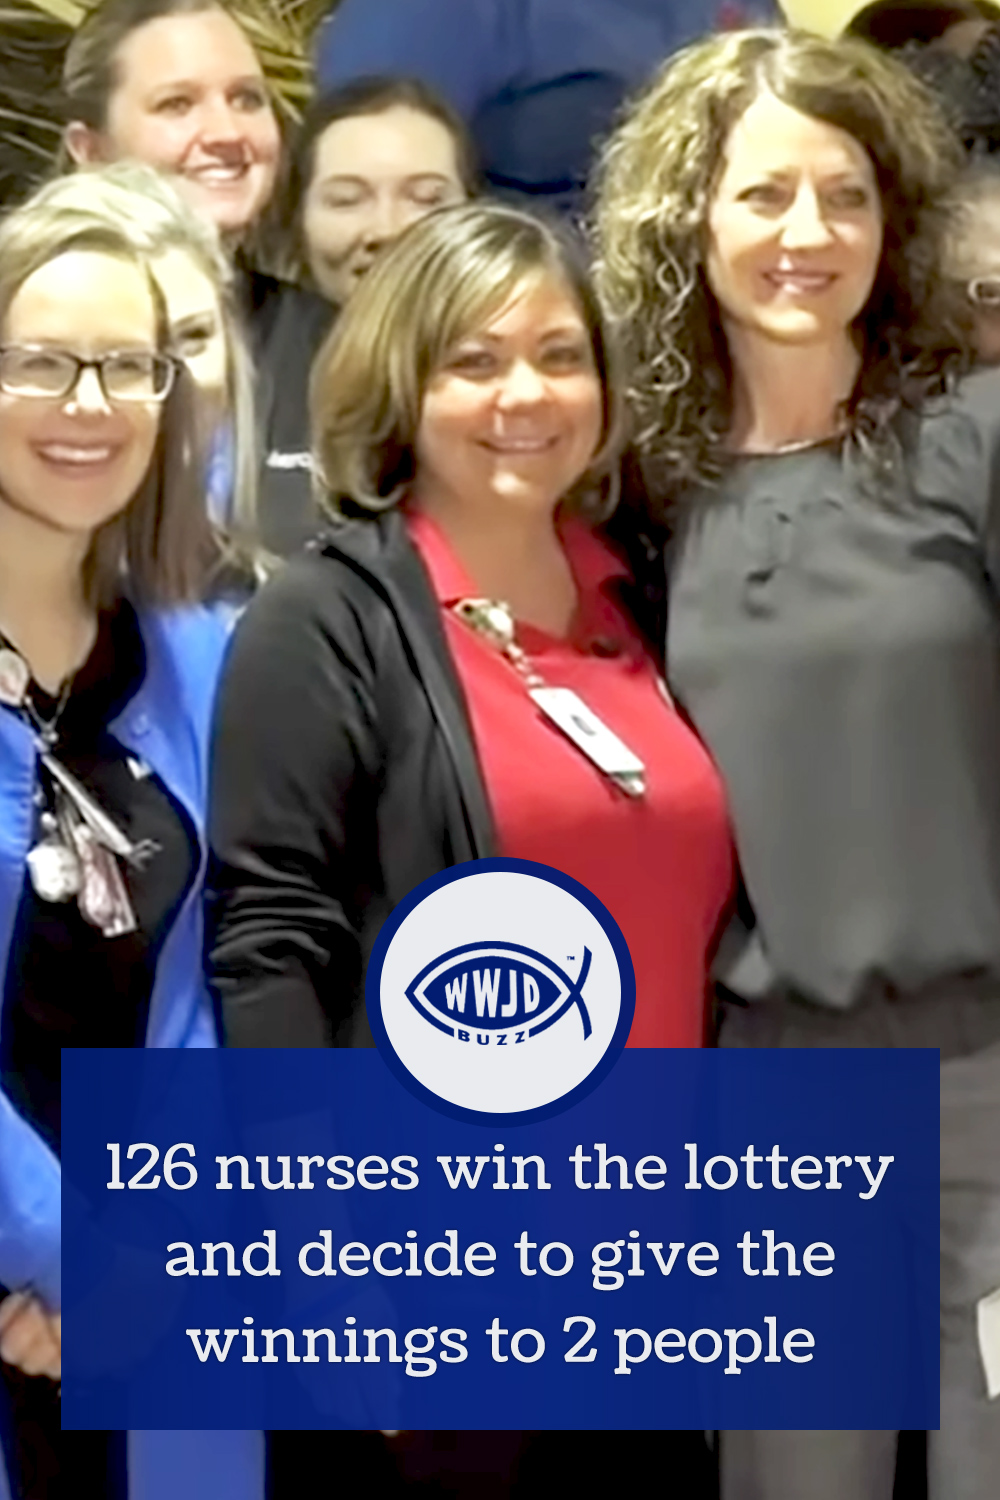 126 nurses win the lottery and decide to give the winnings to 2 people